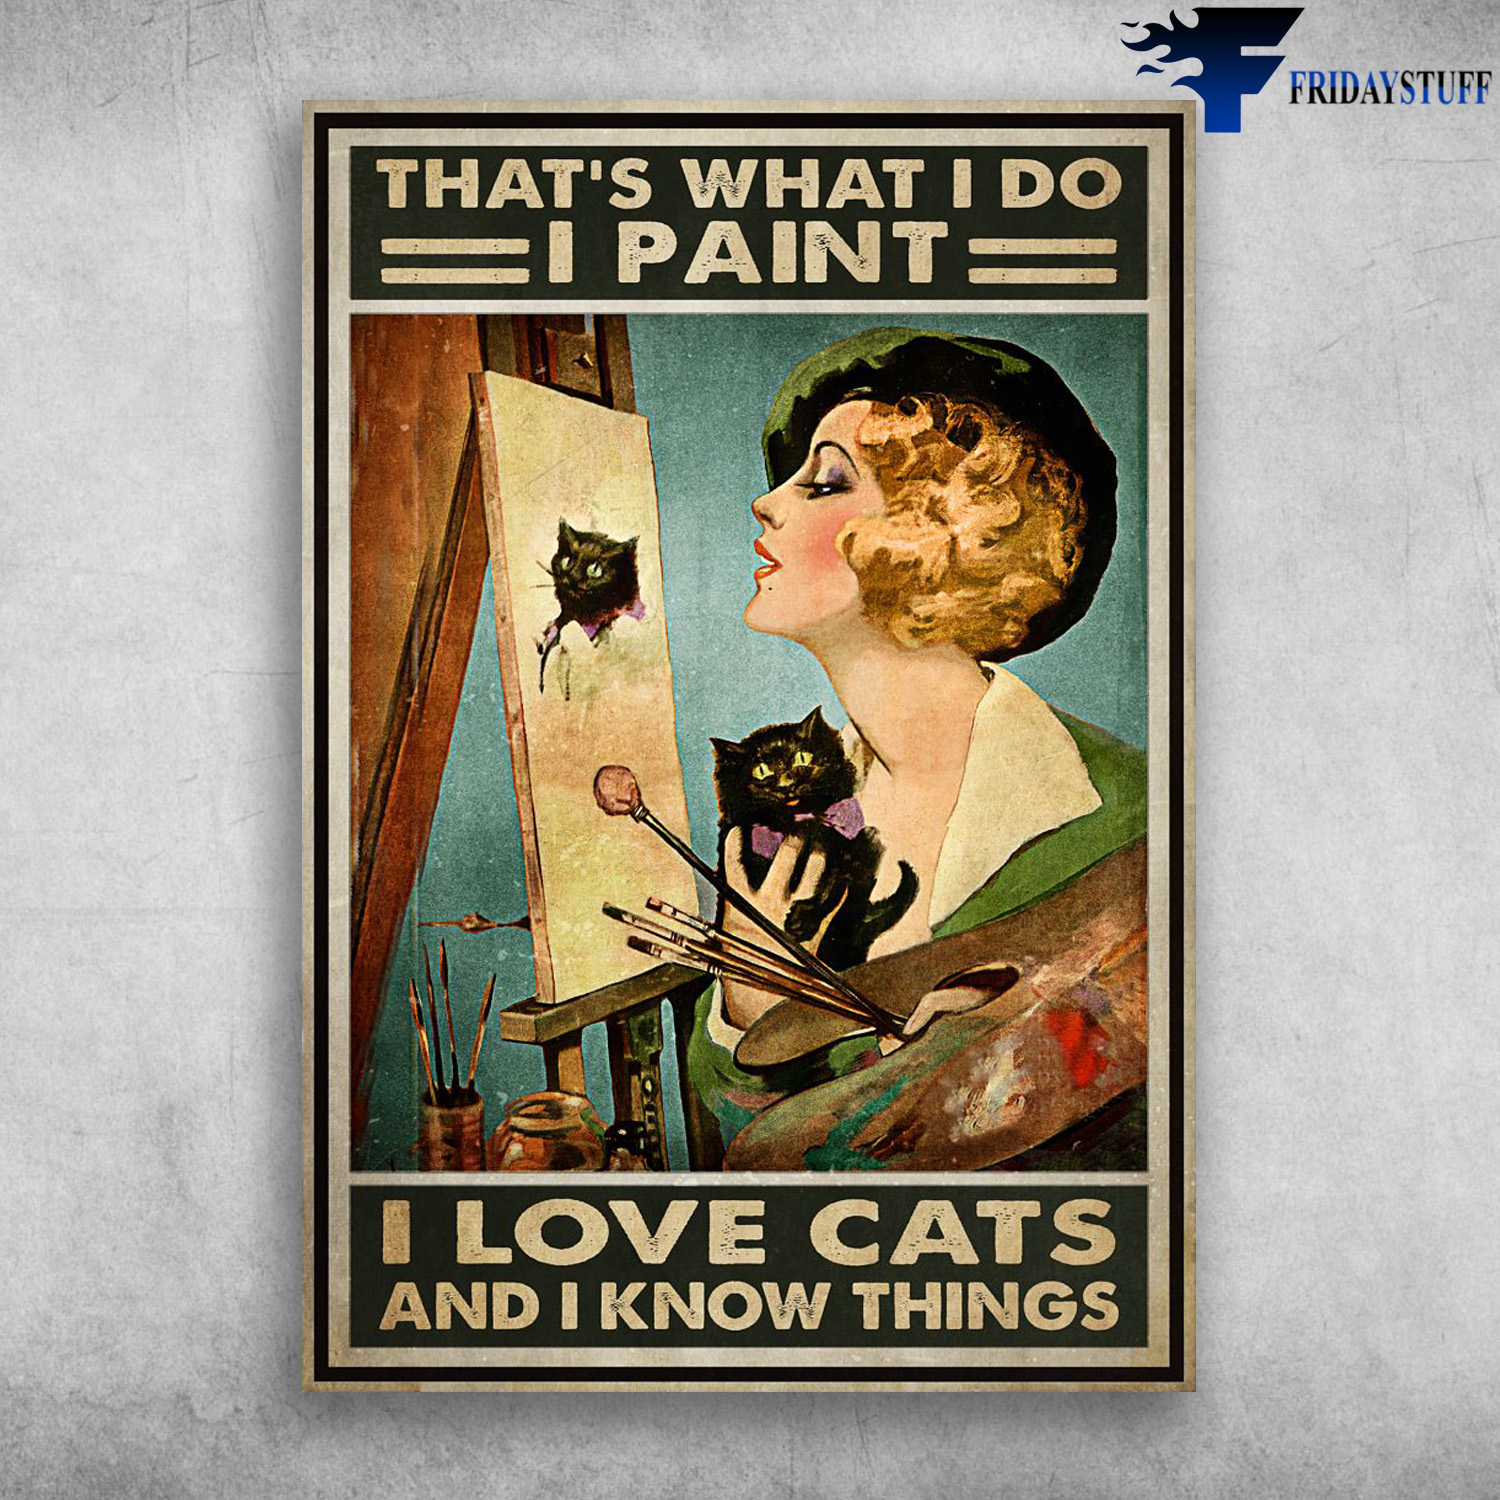 Painting Girl, Lady Painter - That's What I Do, I Pain, I Love Cats, And I Know Things